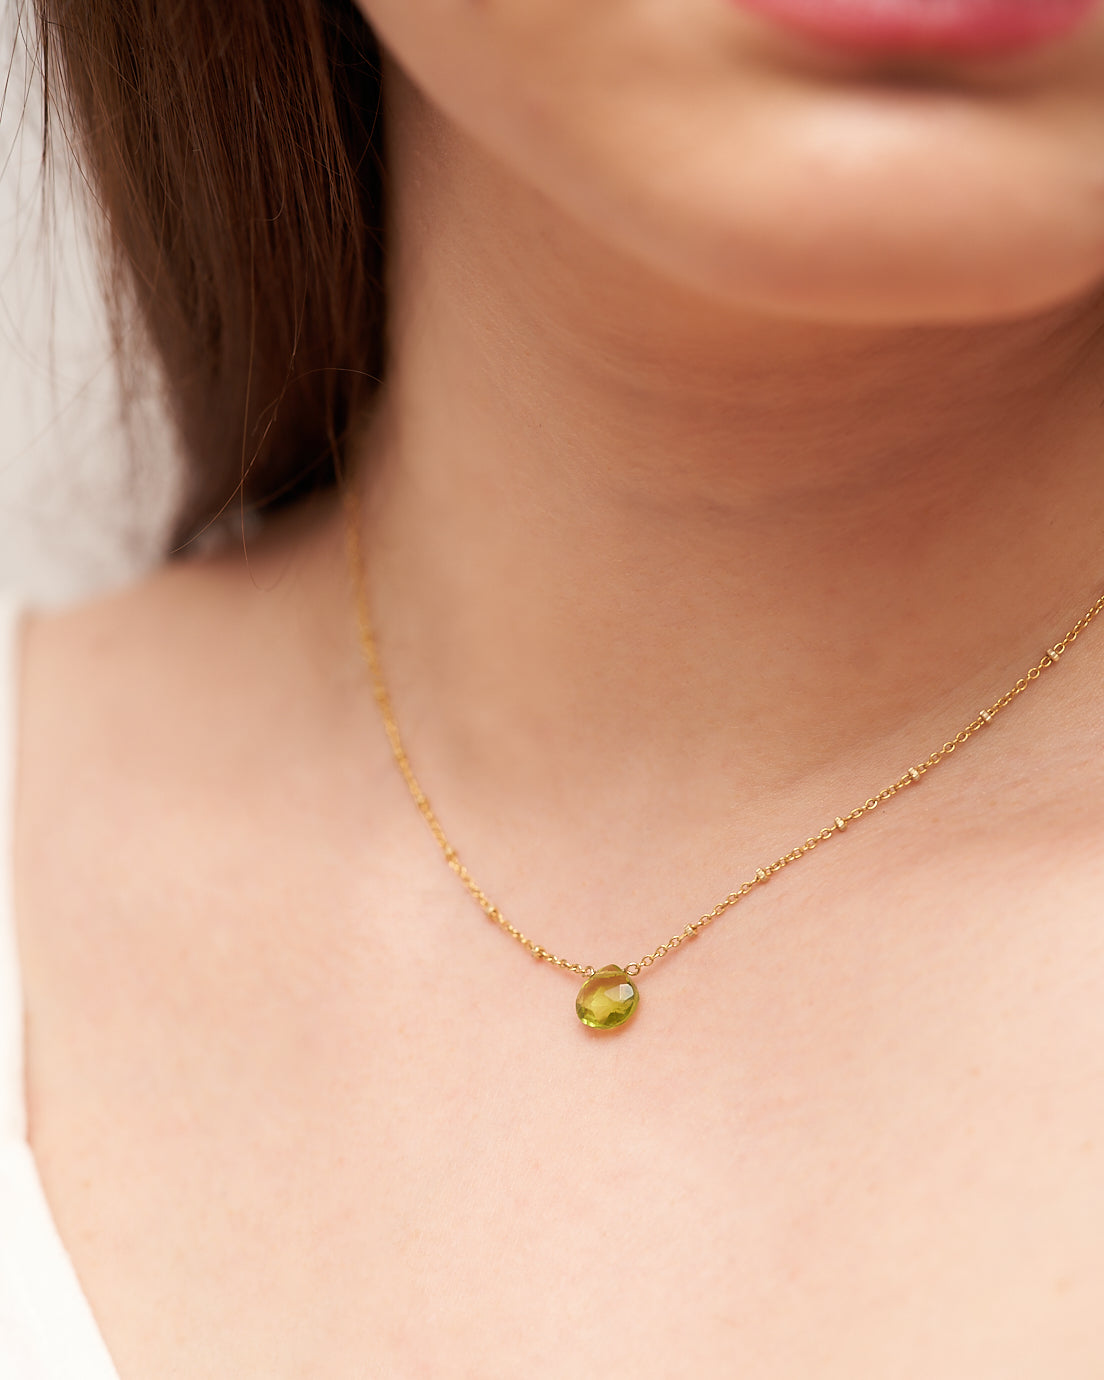 Droplet Peridot Necklace